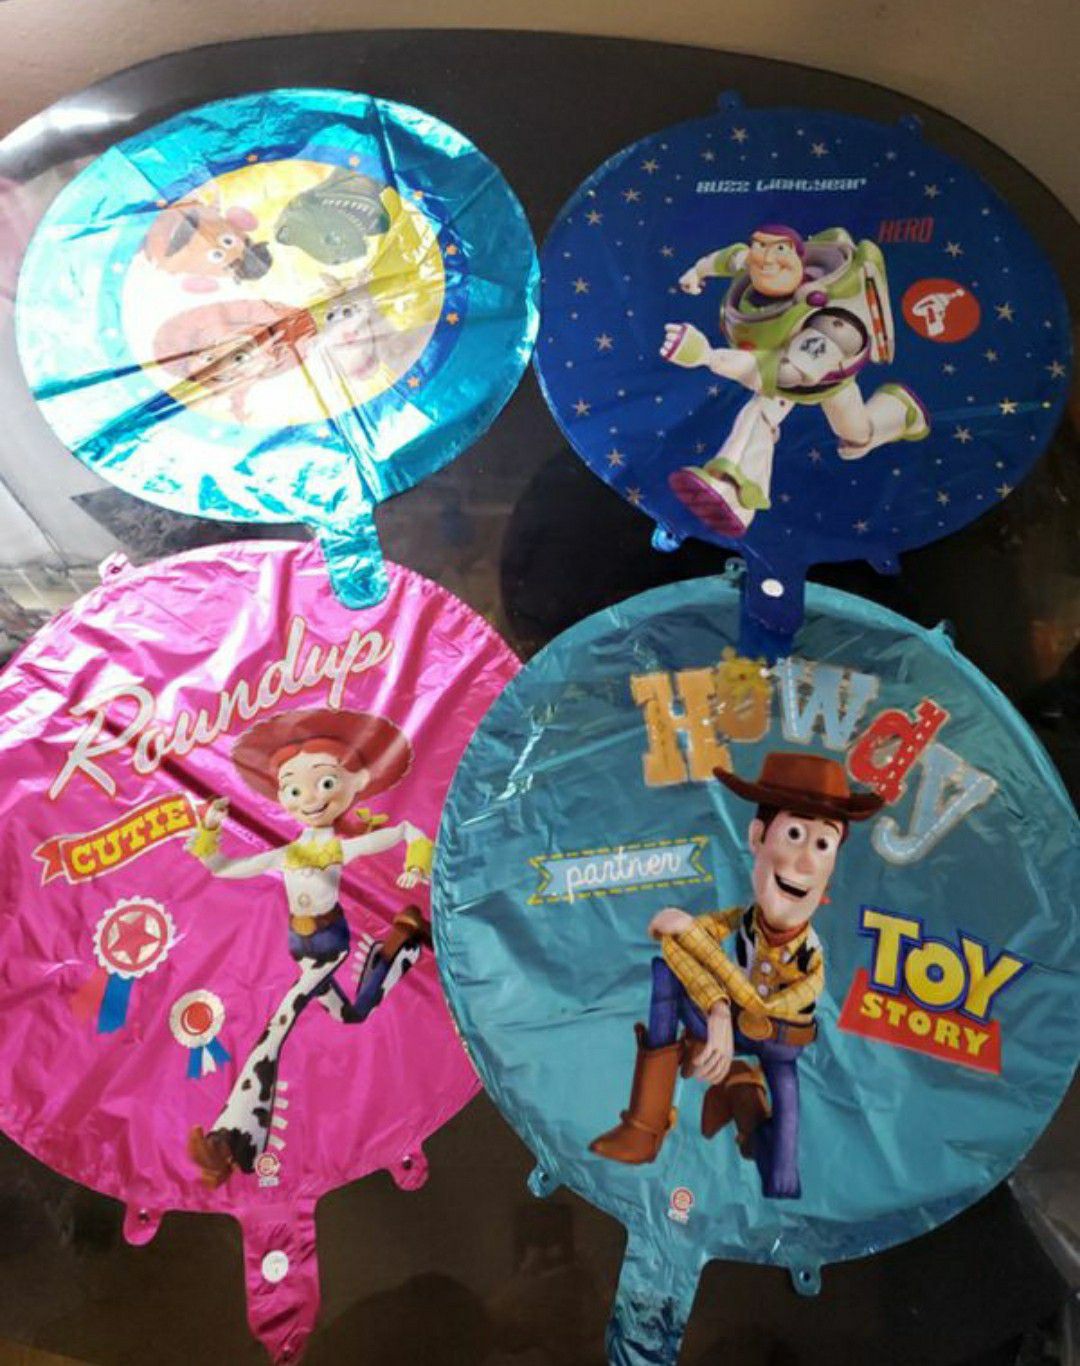 Toy story balloons toy story party supplies